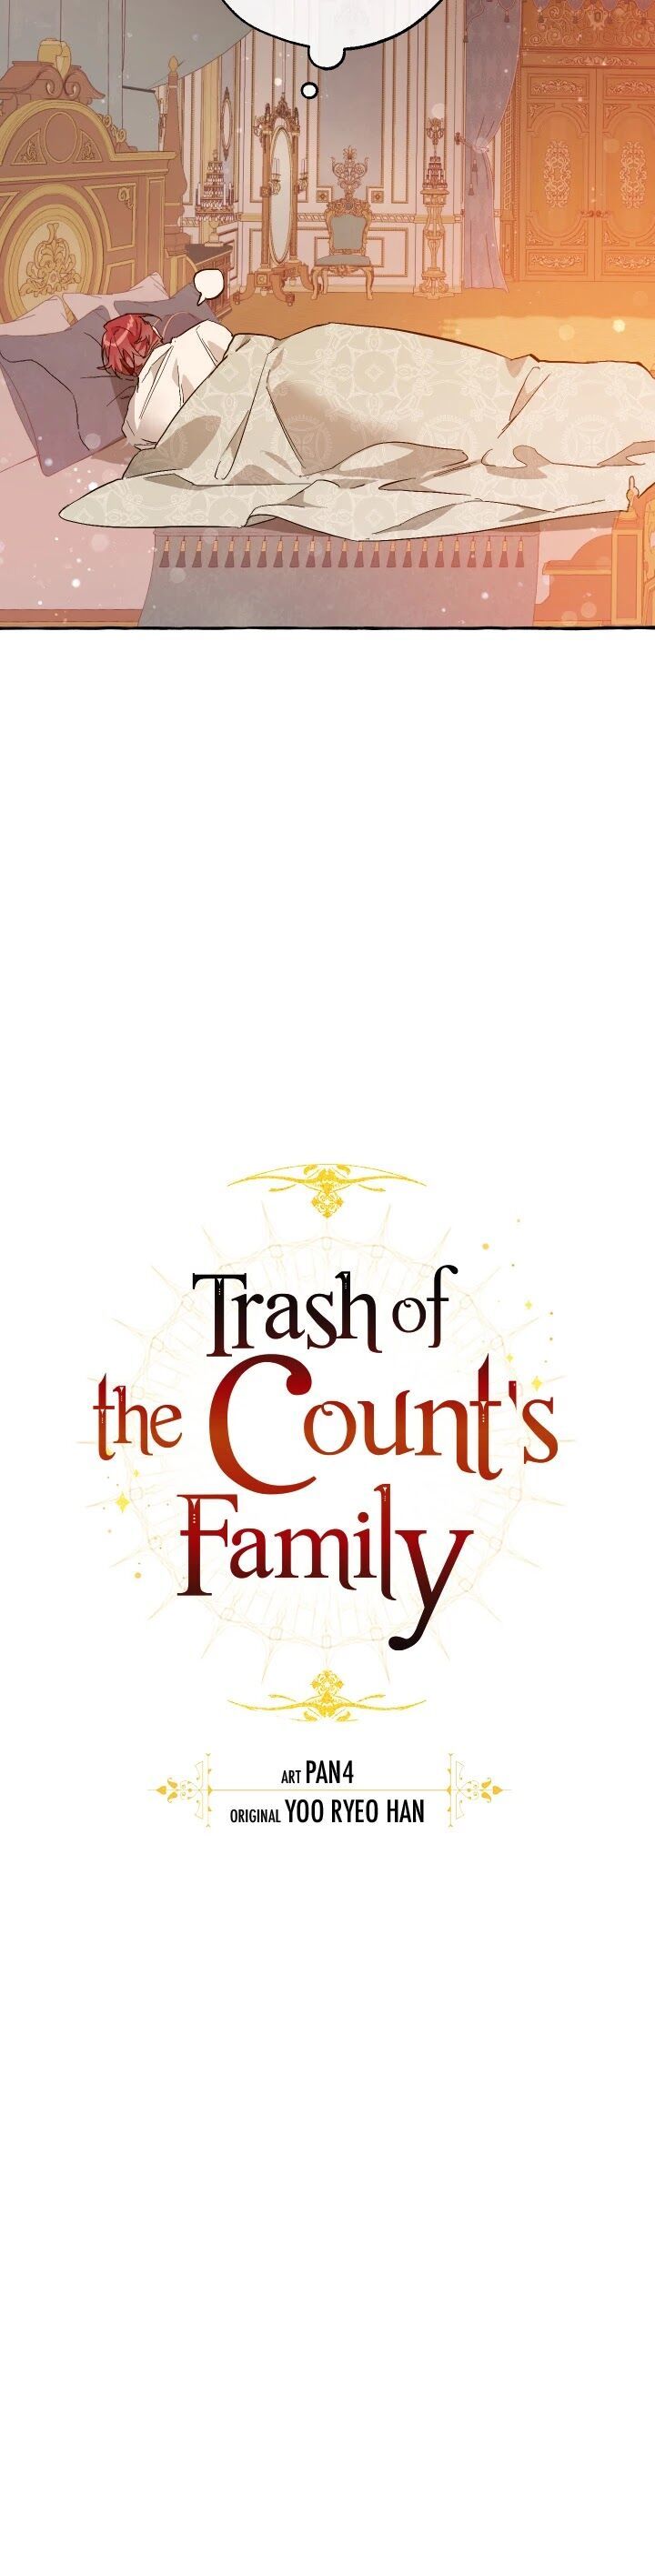 trash_of_the_counts_family_51_15